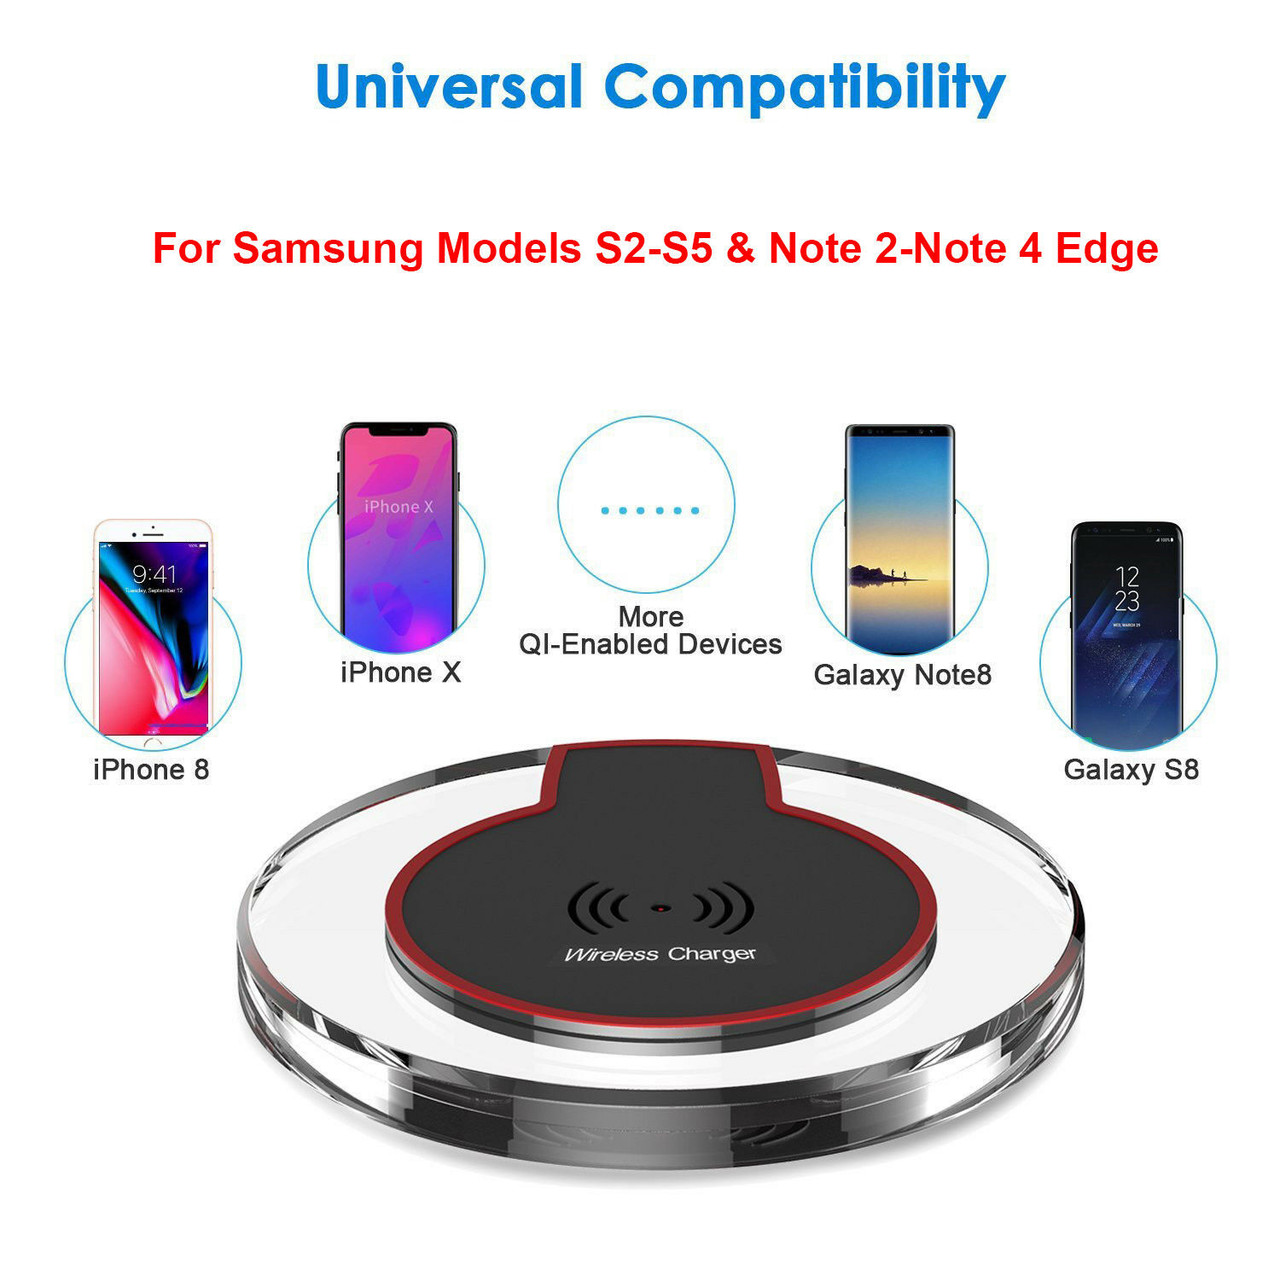 Qi Wireless Charger Universal Charging Pad for LG G4 G5 G6 Q6 V20 V30 iPhone 8